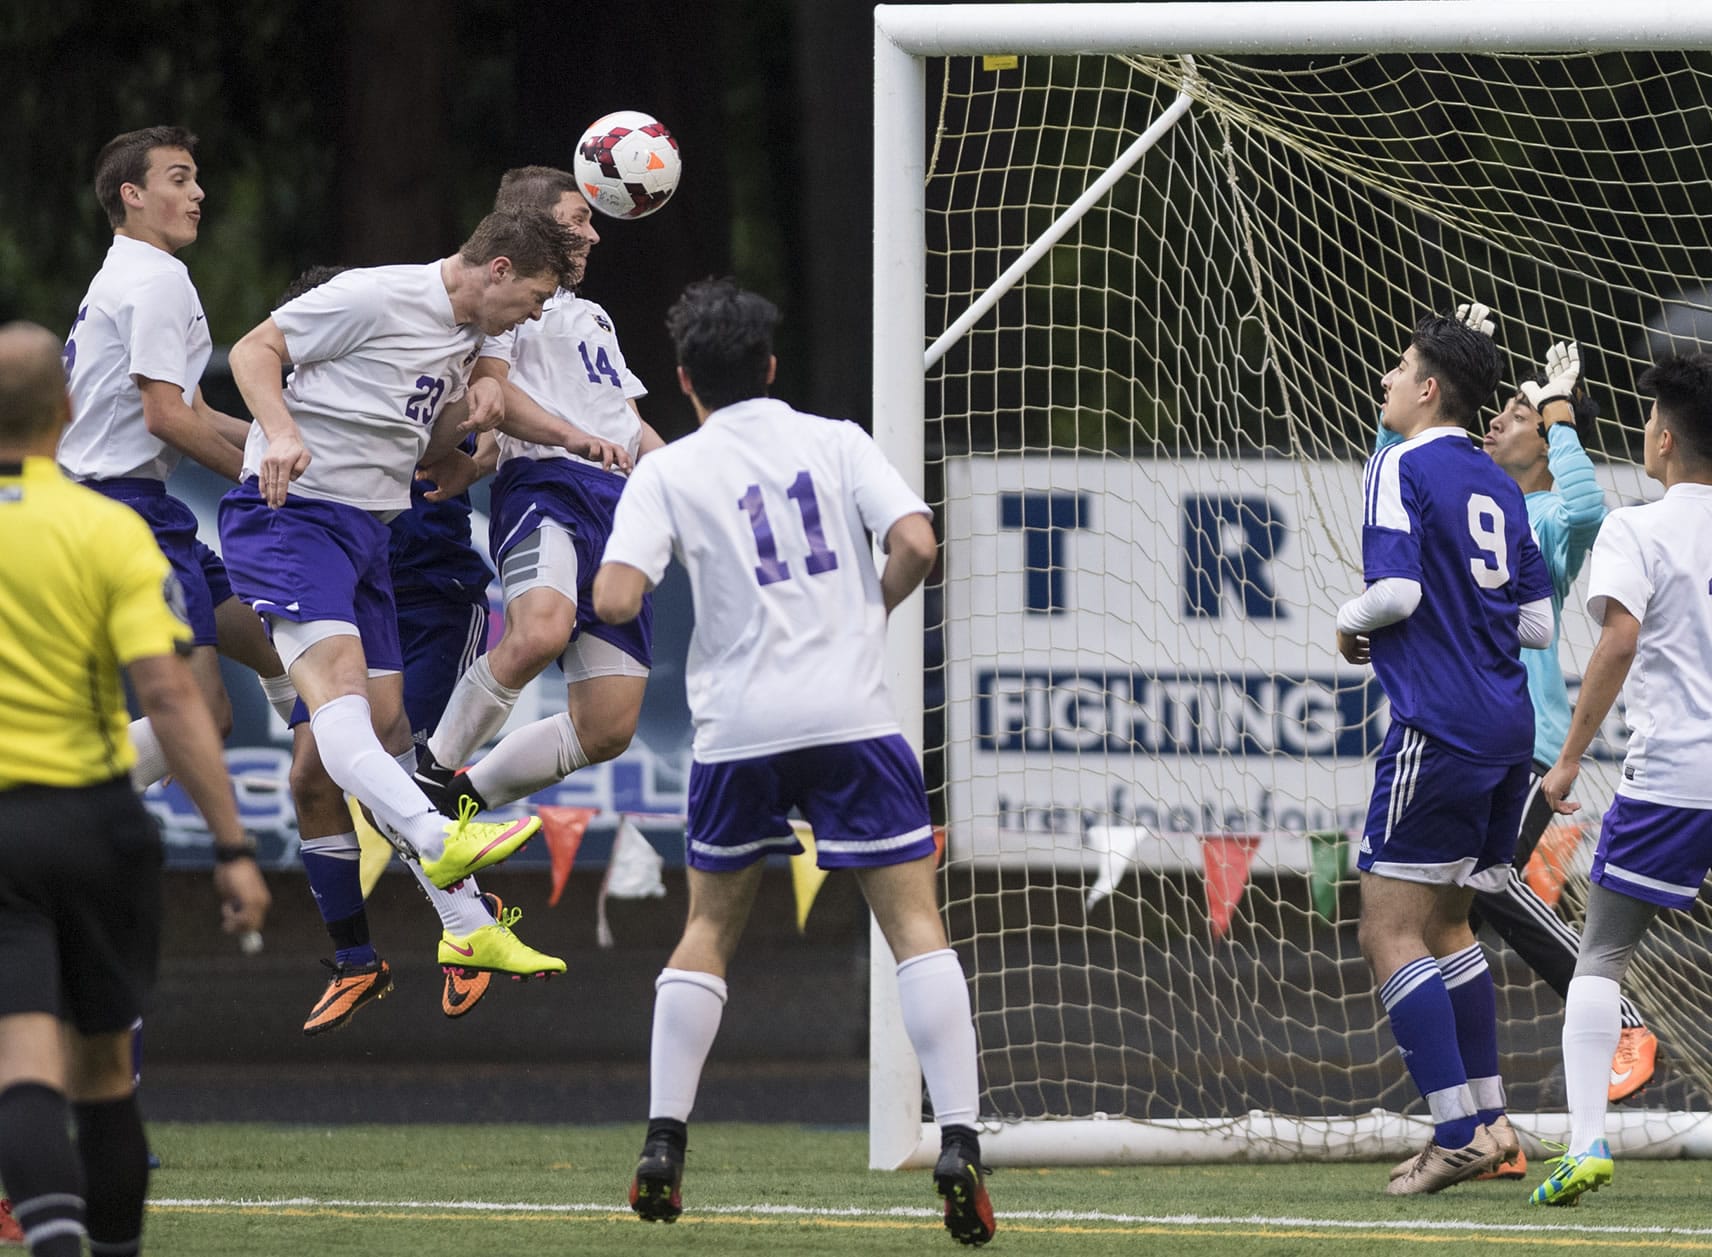 Columbia River’s Ryan Connop (23), heads the ball into the goal in what was initially thought to be the fourth goal for Columbia River during overtime in the first round of the 2A state playoffs against Highline at the Kiggins Bowl in Vancouver, Tuesday May 16, 2017.